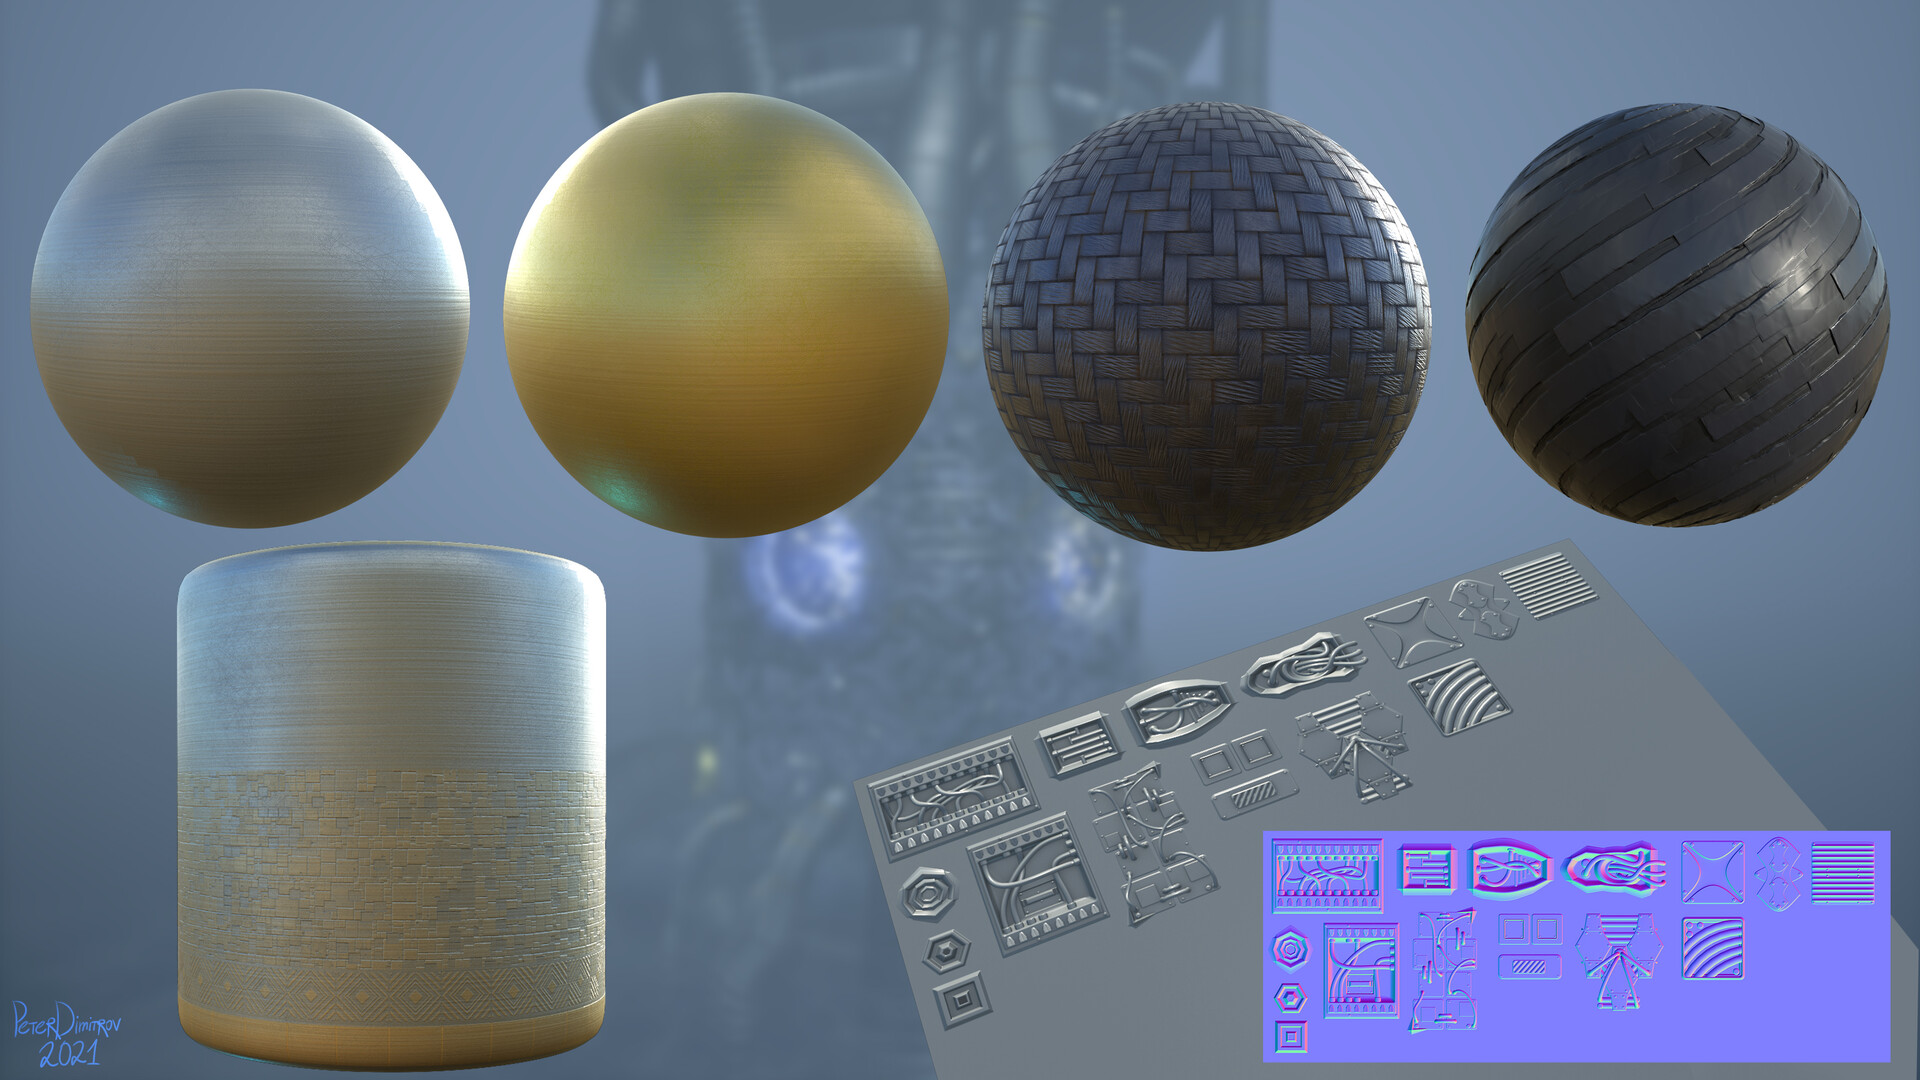 Materials callout sheet. Consists of 4 UV spheres. Each has a different material applied: chrome metal, gold metal, cable material one, cable material two (looks like insulation tape). Below those is a cylinder with a material that has square greeble details. To the side of that is a flat plane showcasing hardsurface intricate details baked flat.